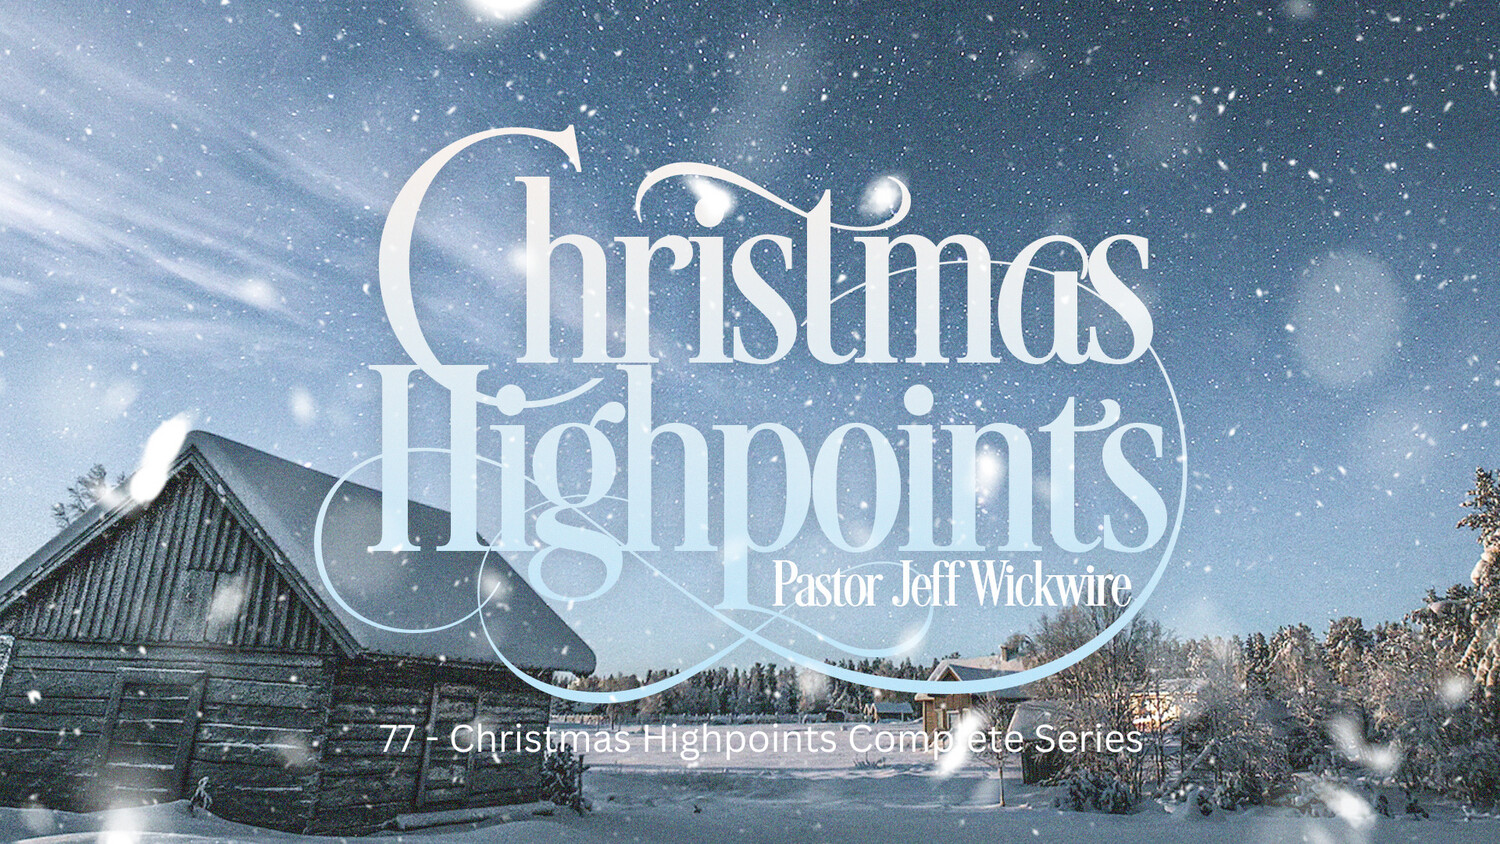 77 - Christmas Highpoints Complete Series 2022 - By Pastor Jeff Wickwire